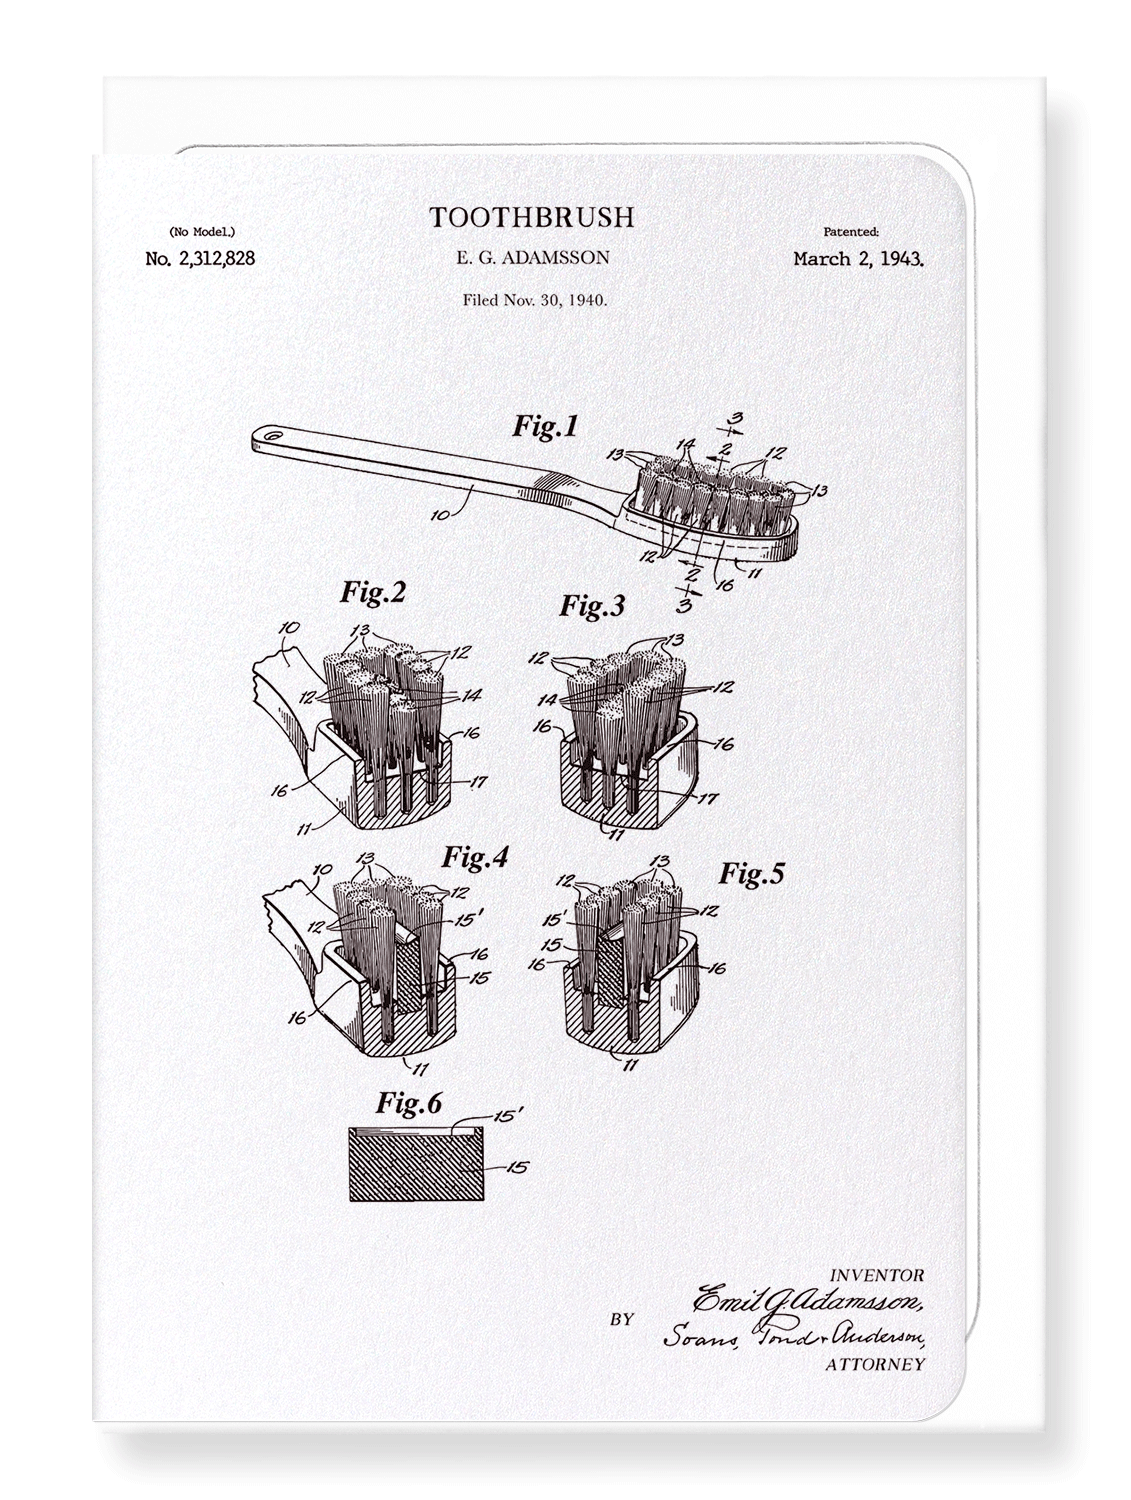 Ezen Designs - Patent of toothbrush (1943) - Greeting Card - Front